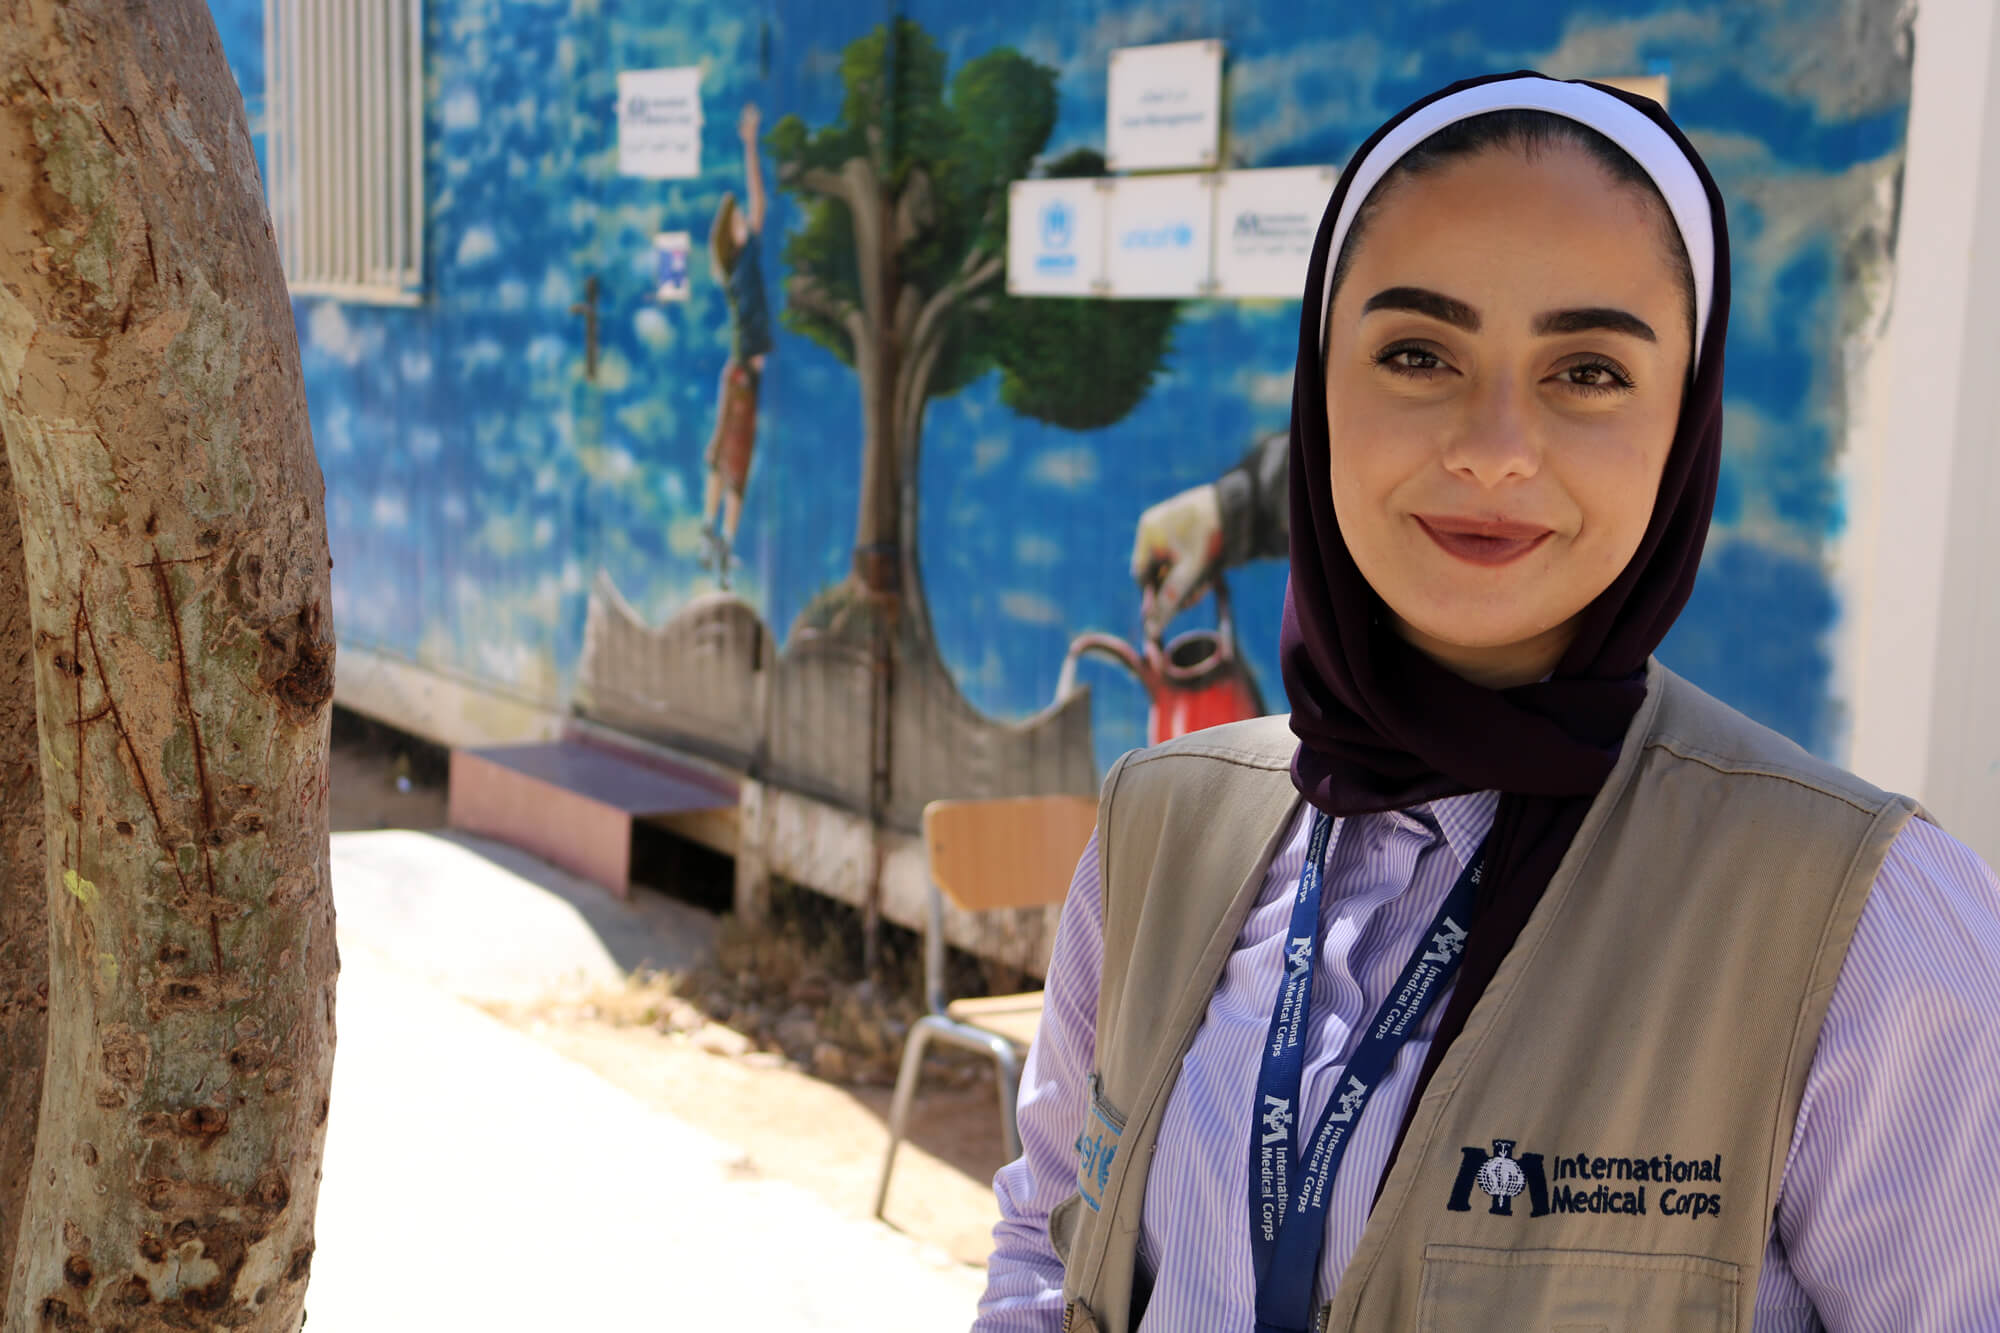 Heba Lutfi is International Medical Corps Jordan’s Child Protection Team Leader and the co-chair of the camp’s Child Protection, Sexual and Gender-Based Violence Sub-Working Group.